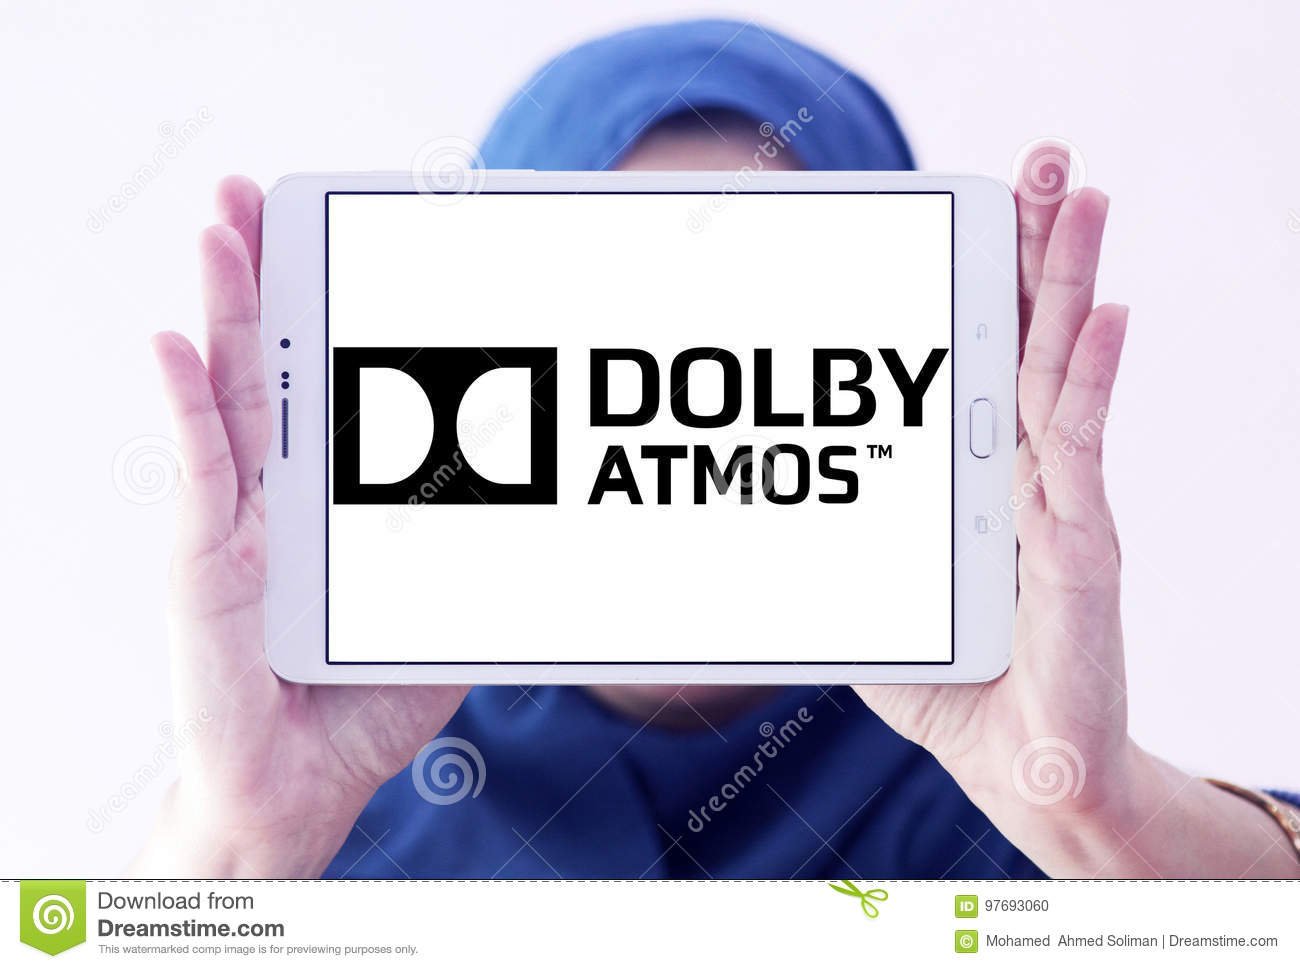 dolby atmos demo free download